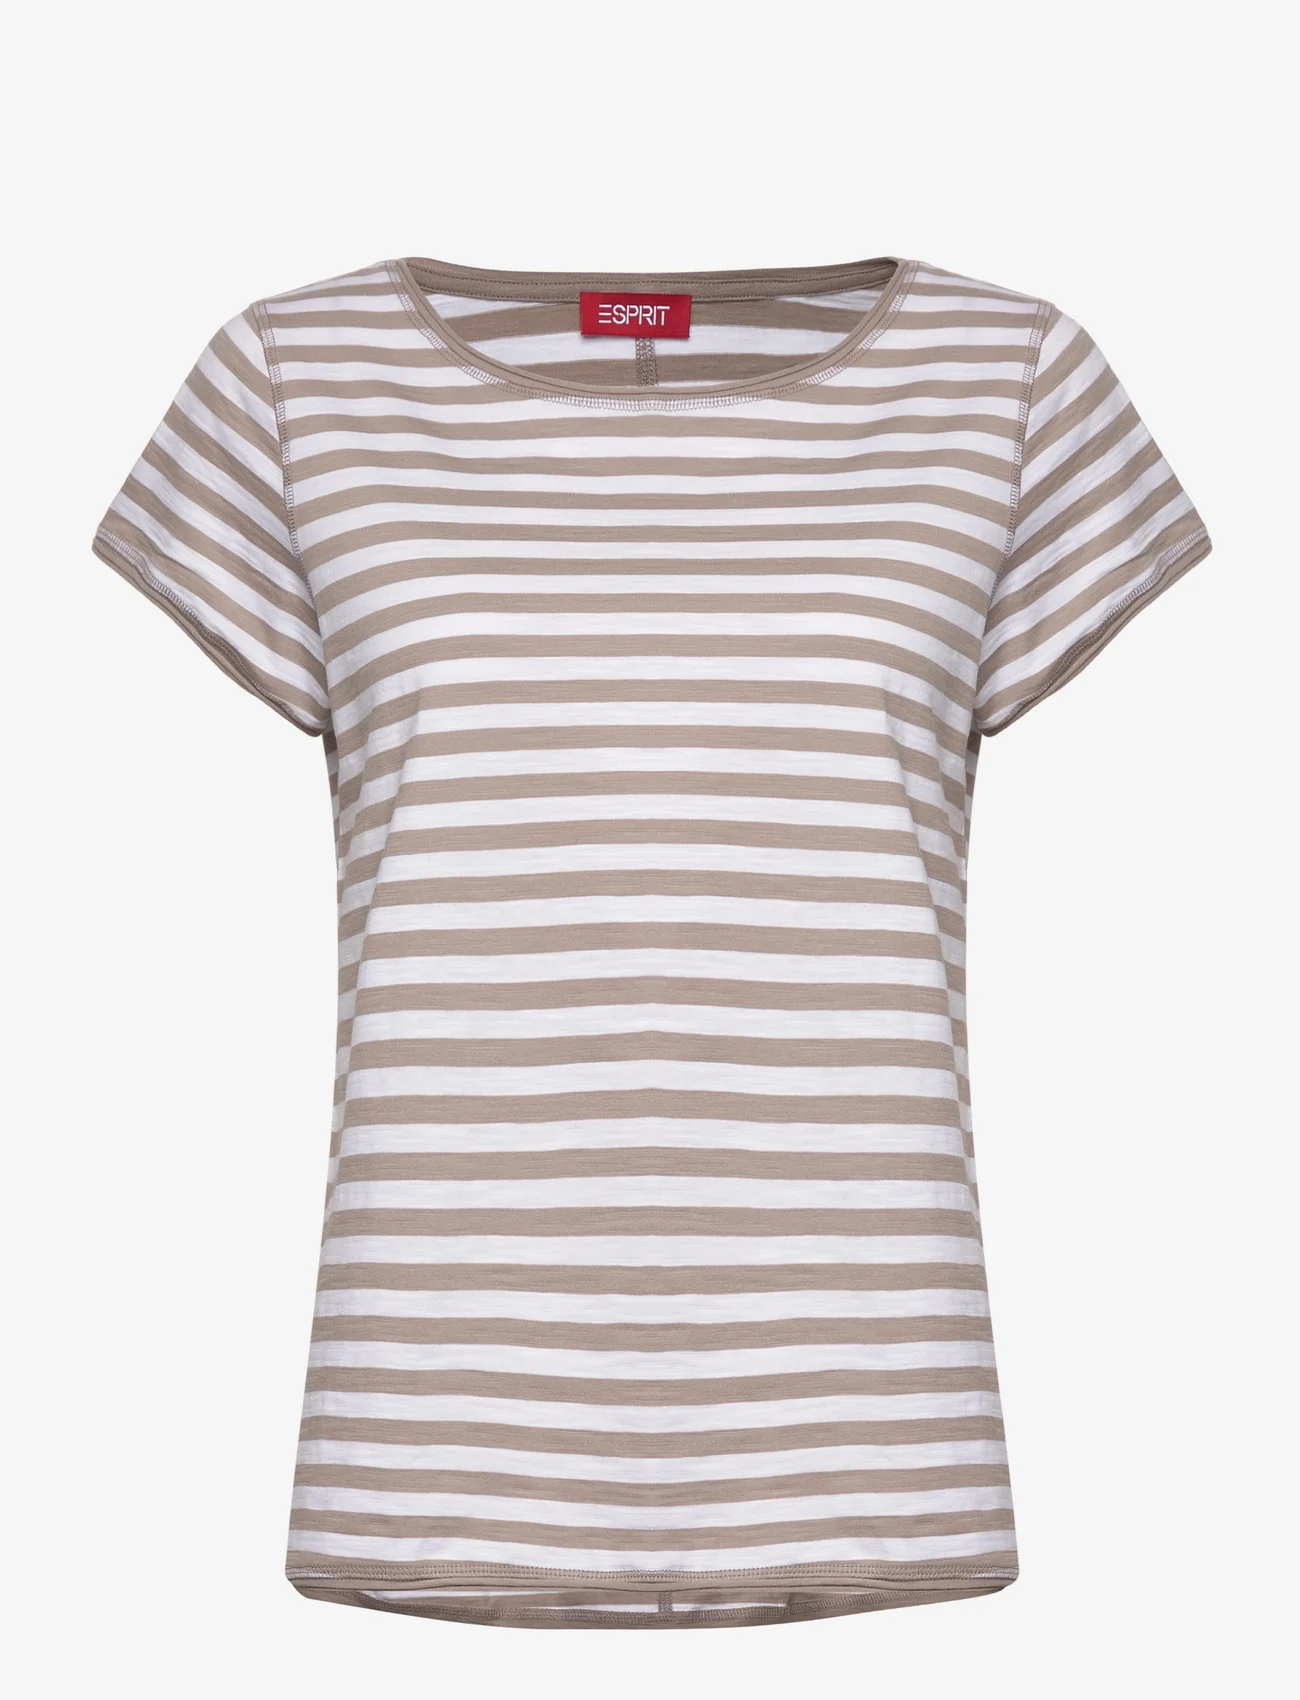 Esprit Casual - T-Shirts - t-shirts - light taupe 3 - 0